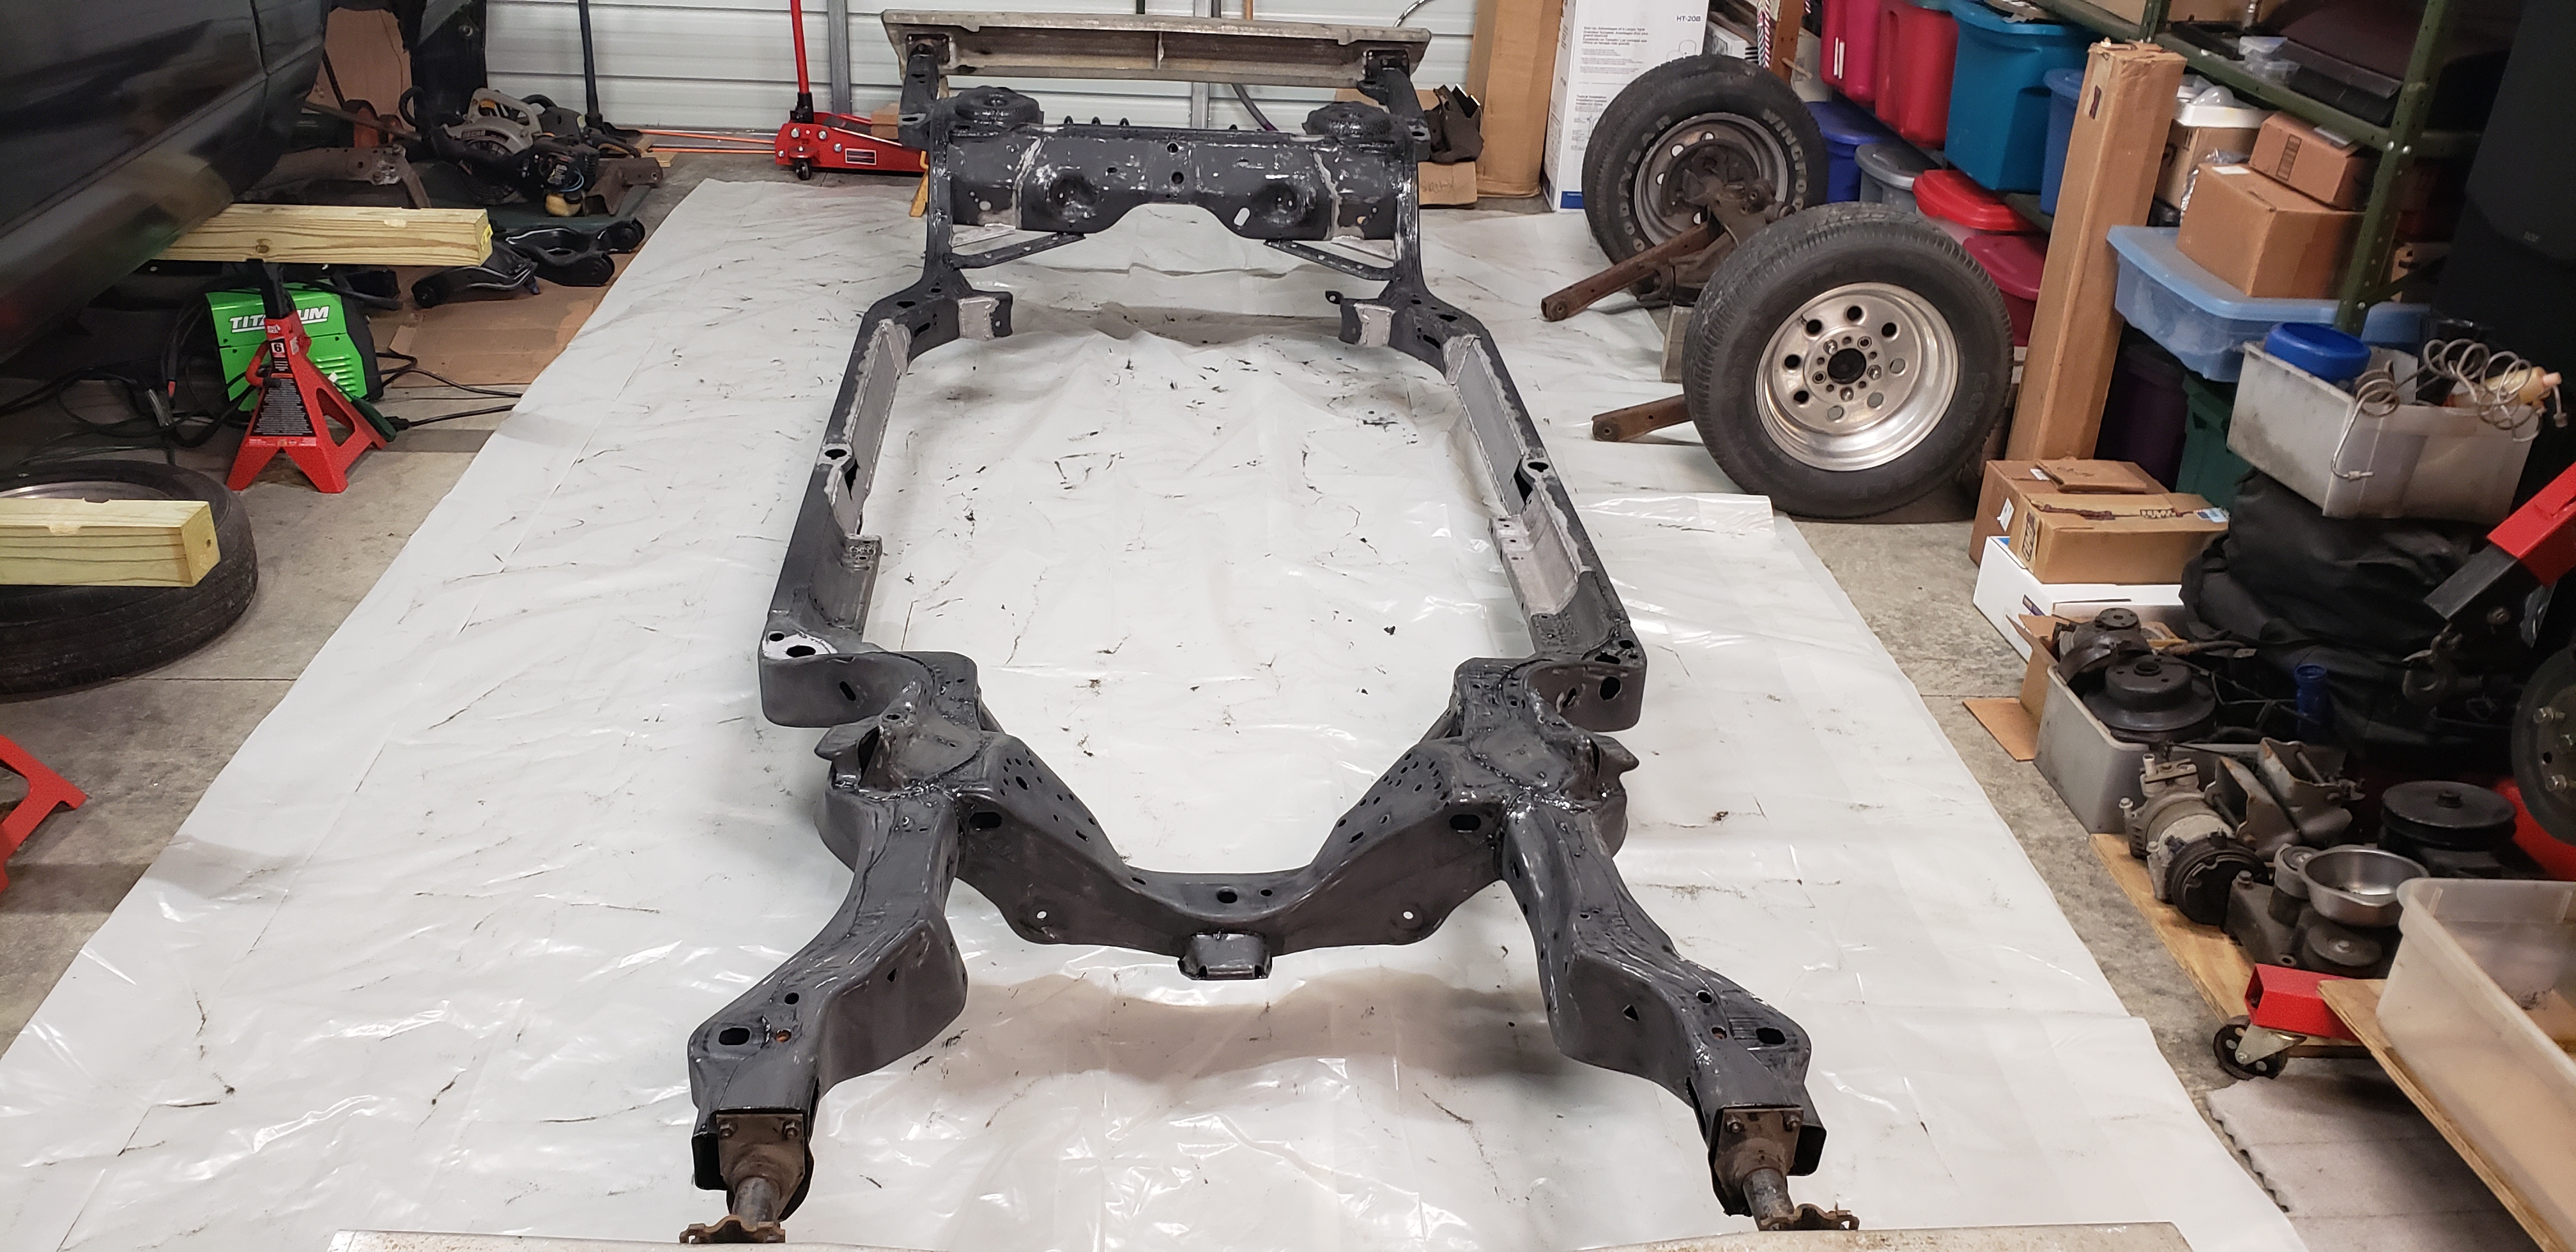 New Frame Prep For Paint After Repair And Modification (10).jpg